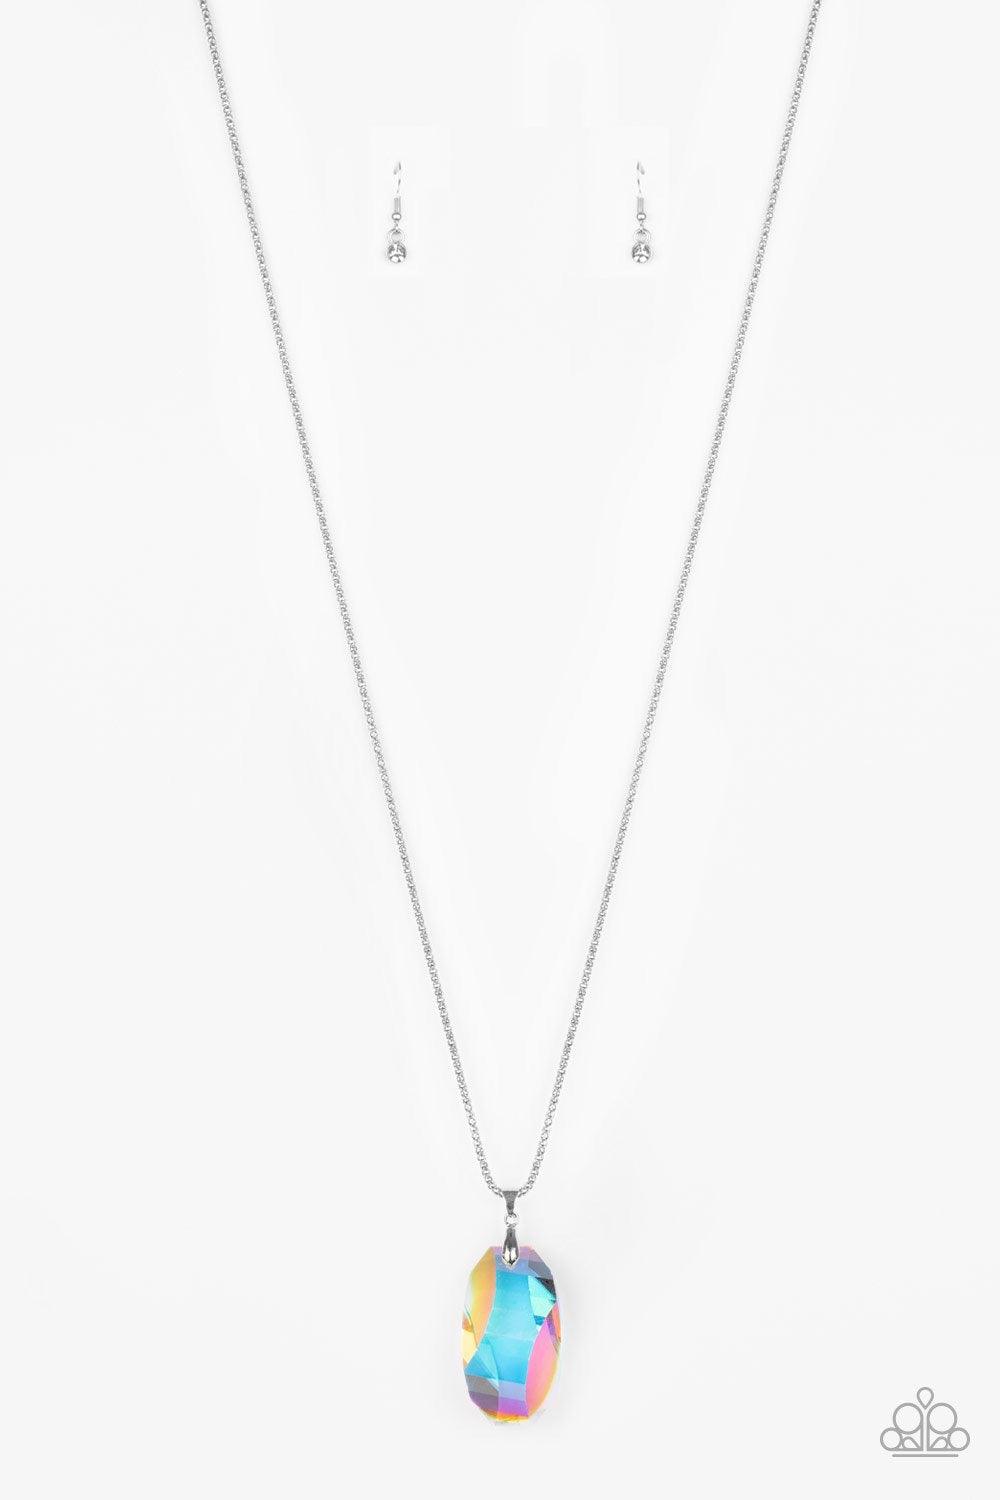 Paparazzi Accessories Gemstone Grandeur - Multi Featuring a raw cut and metallic backing, an iridescent gem swings from the bottom of an elongated silver popcorn chain. Dotted with a dainty white rhinestone, the faceted gem catches and refracts the light